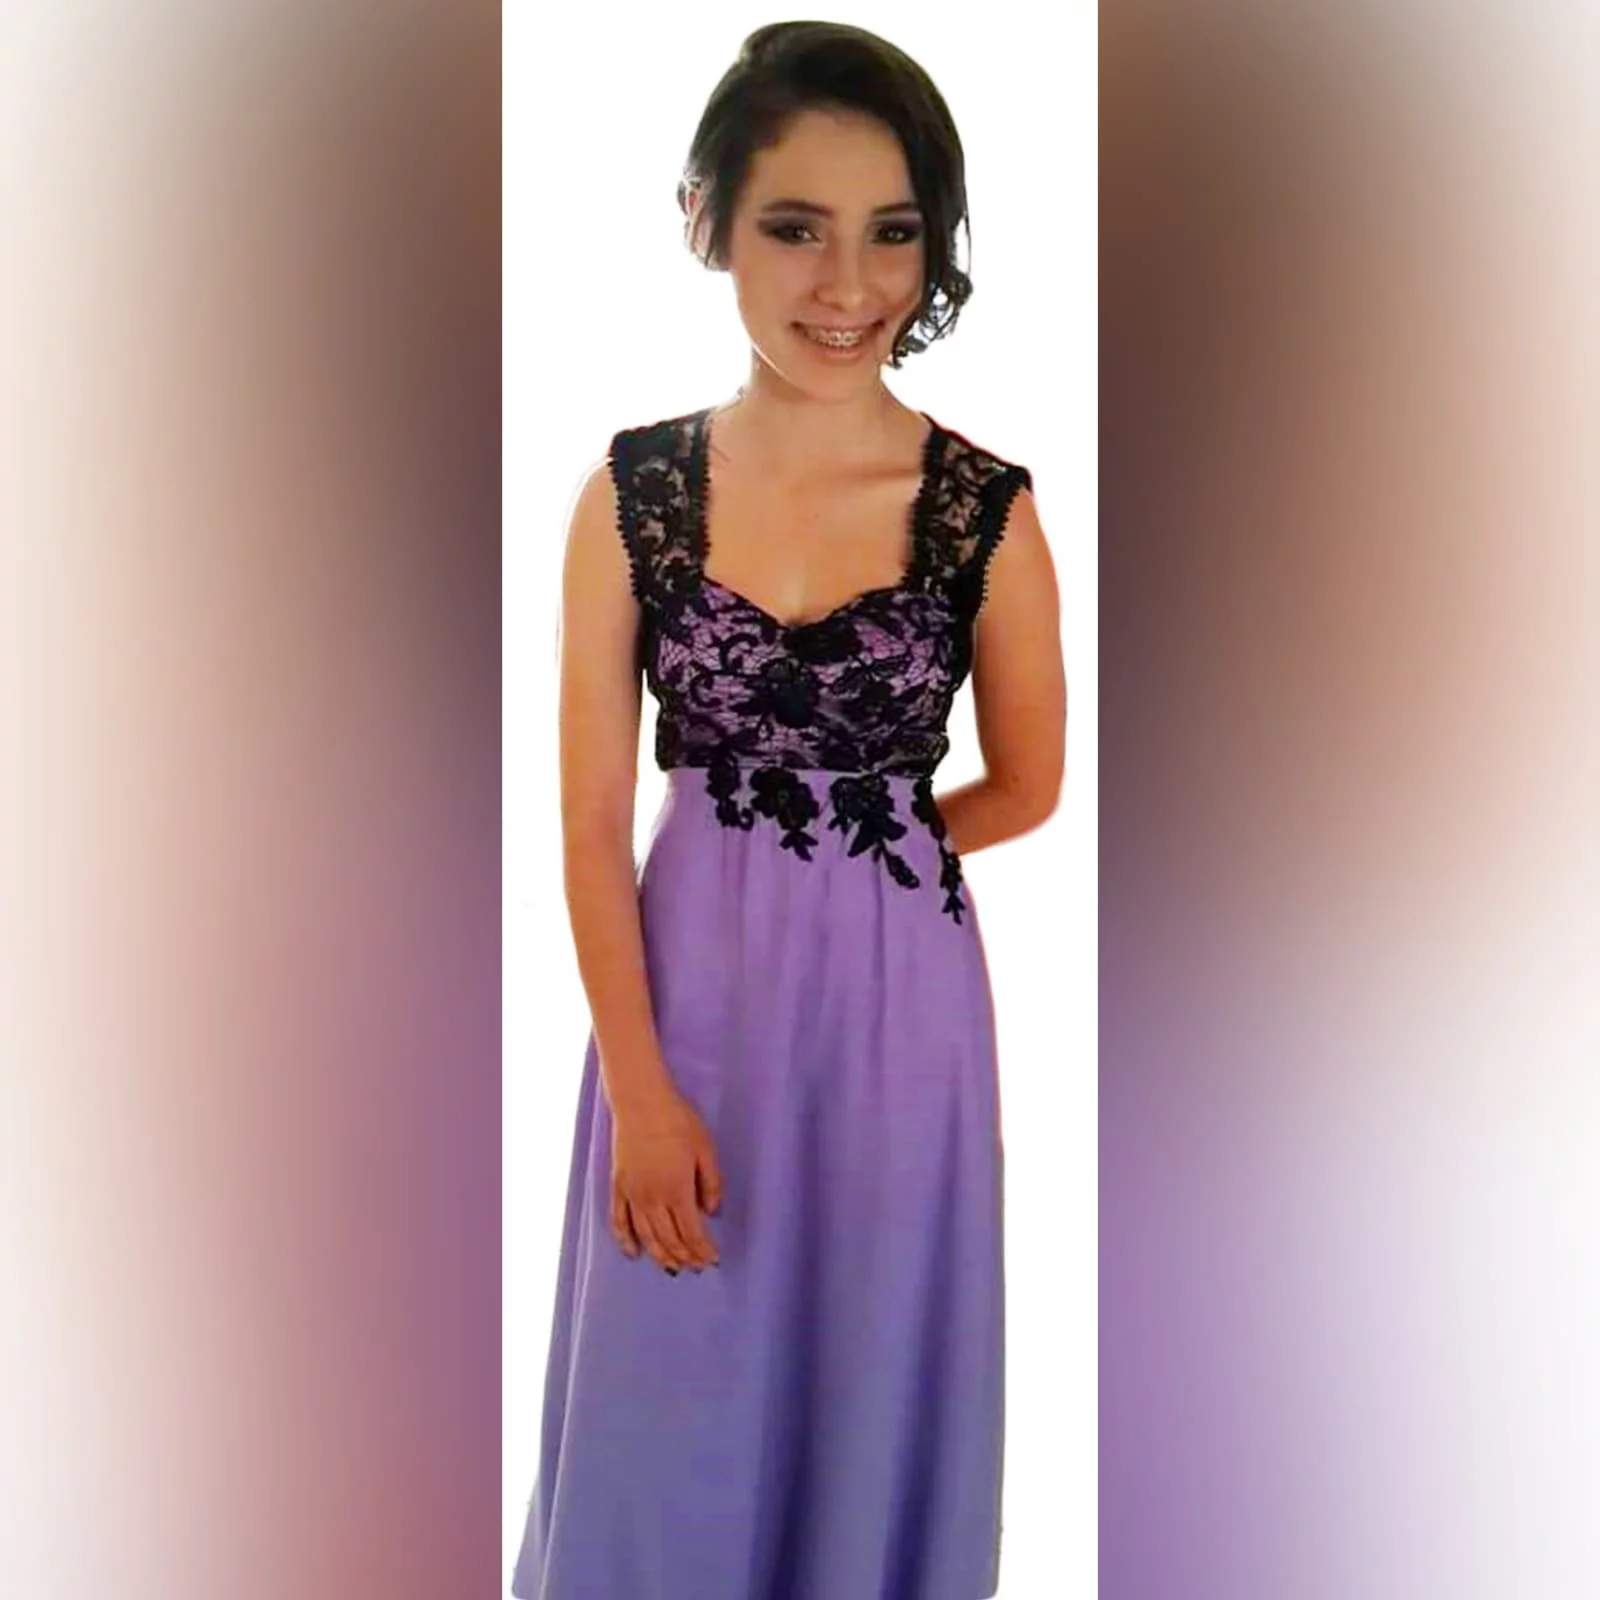 Lilac and black lace matric farewell dress 6 lilac and black lace matric farewell dress. Bodice with applique lace and a sweetheart neckline. With sheer lace shoulder straps and sheer lace on the back. Long and flowy matric farewell dress.